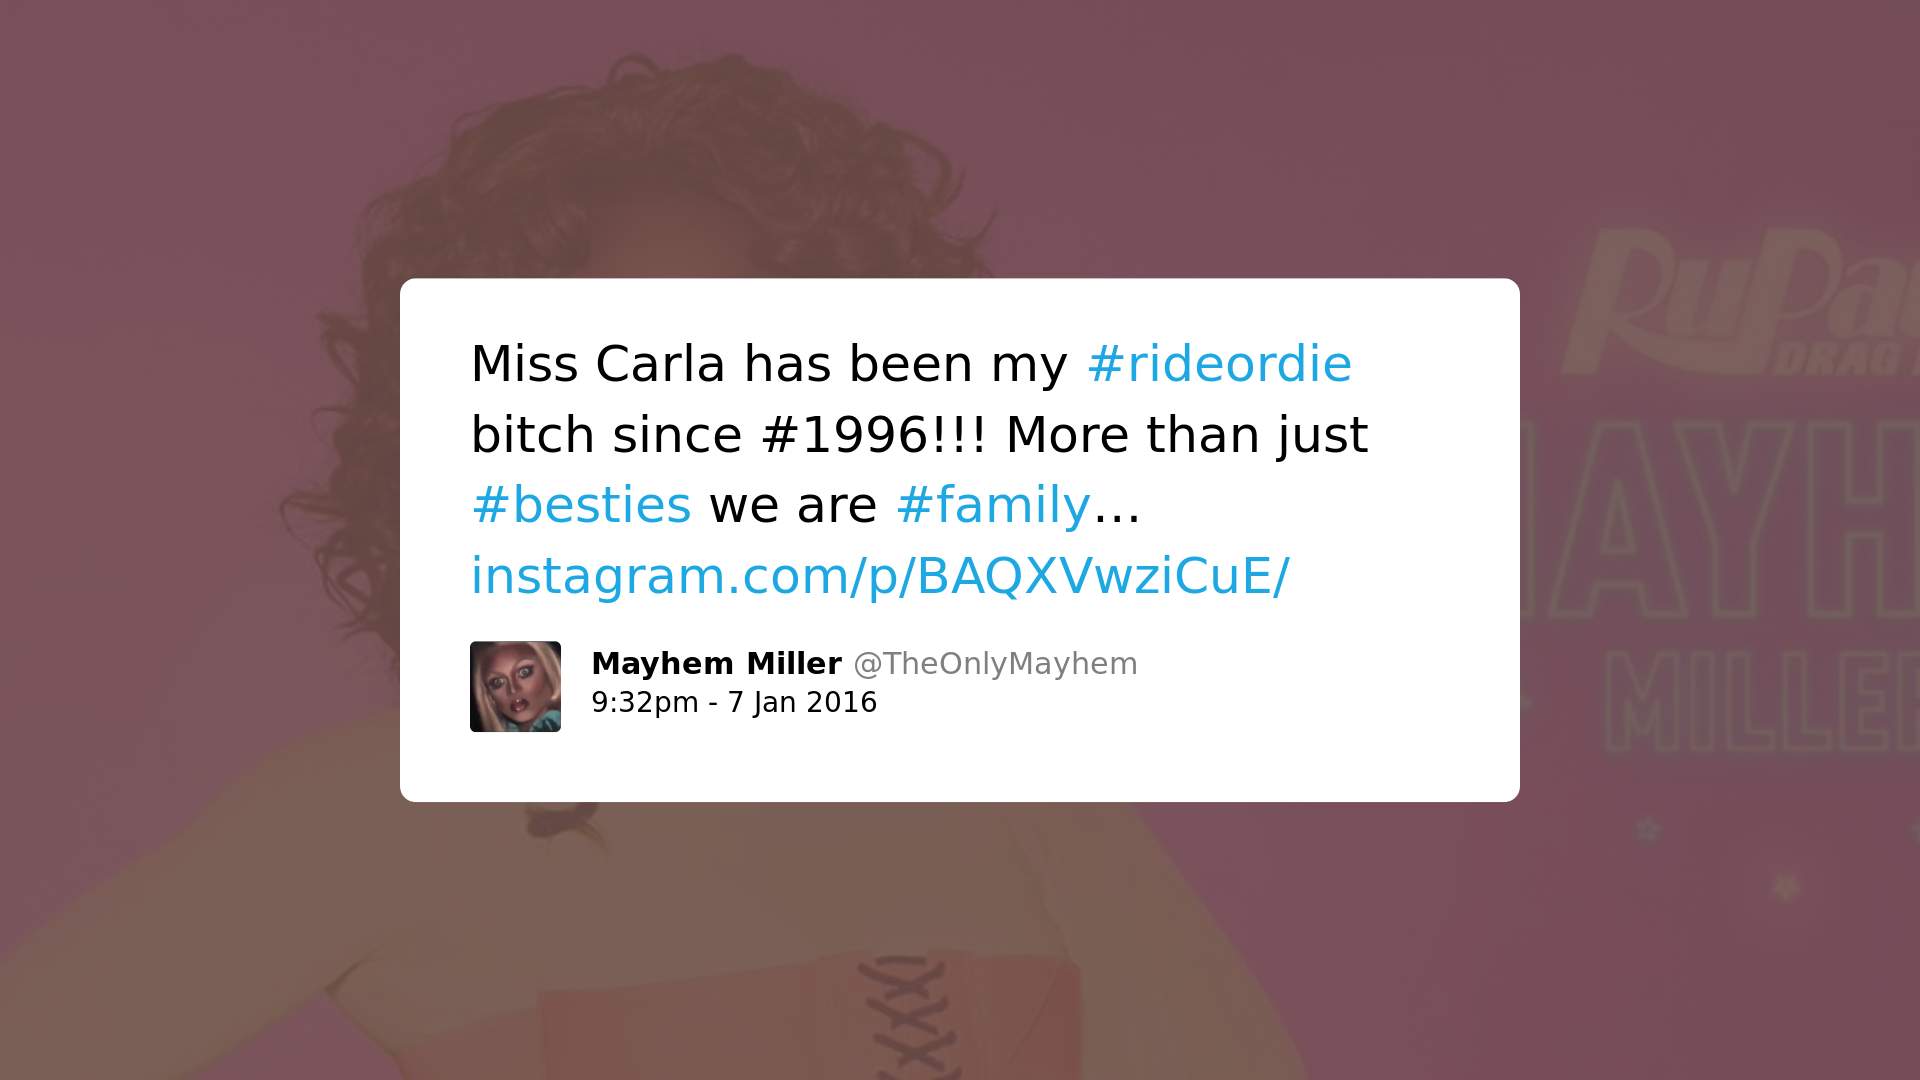 Print screen of a post by Mayhem Miller with the text: Miss Carla has been my #rideordie bitch since #1996!!! More than just #besties we are #family. 